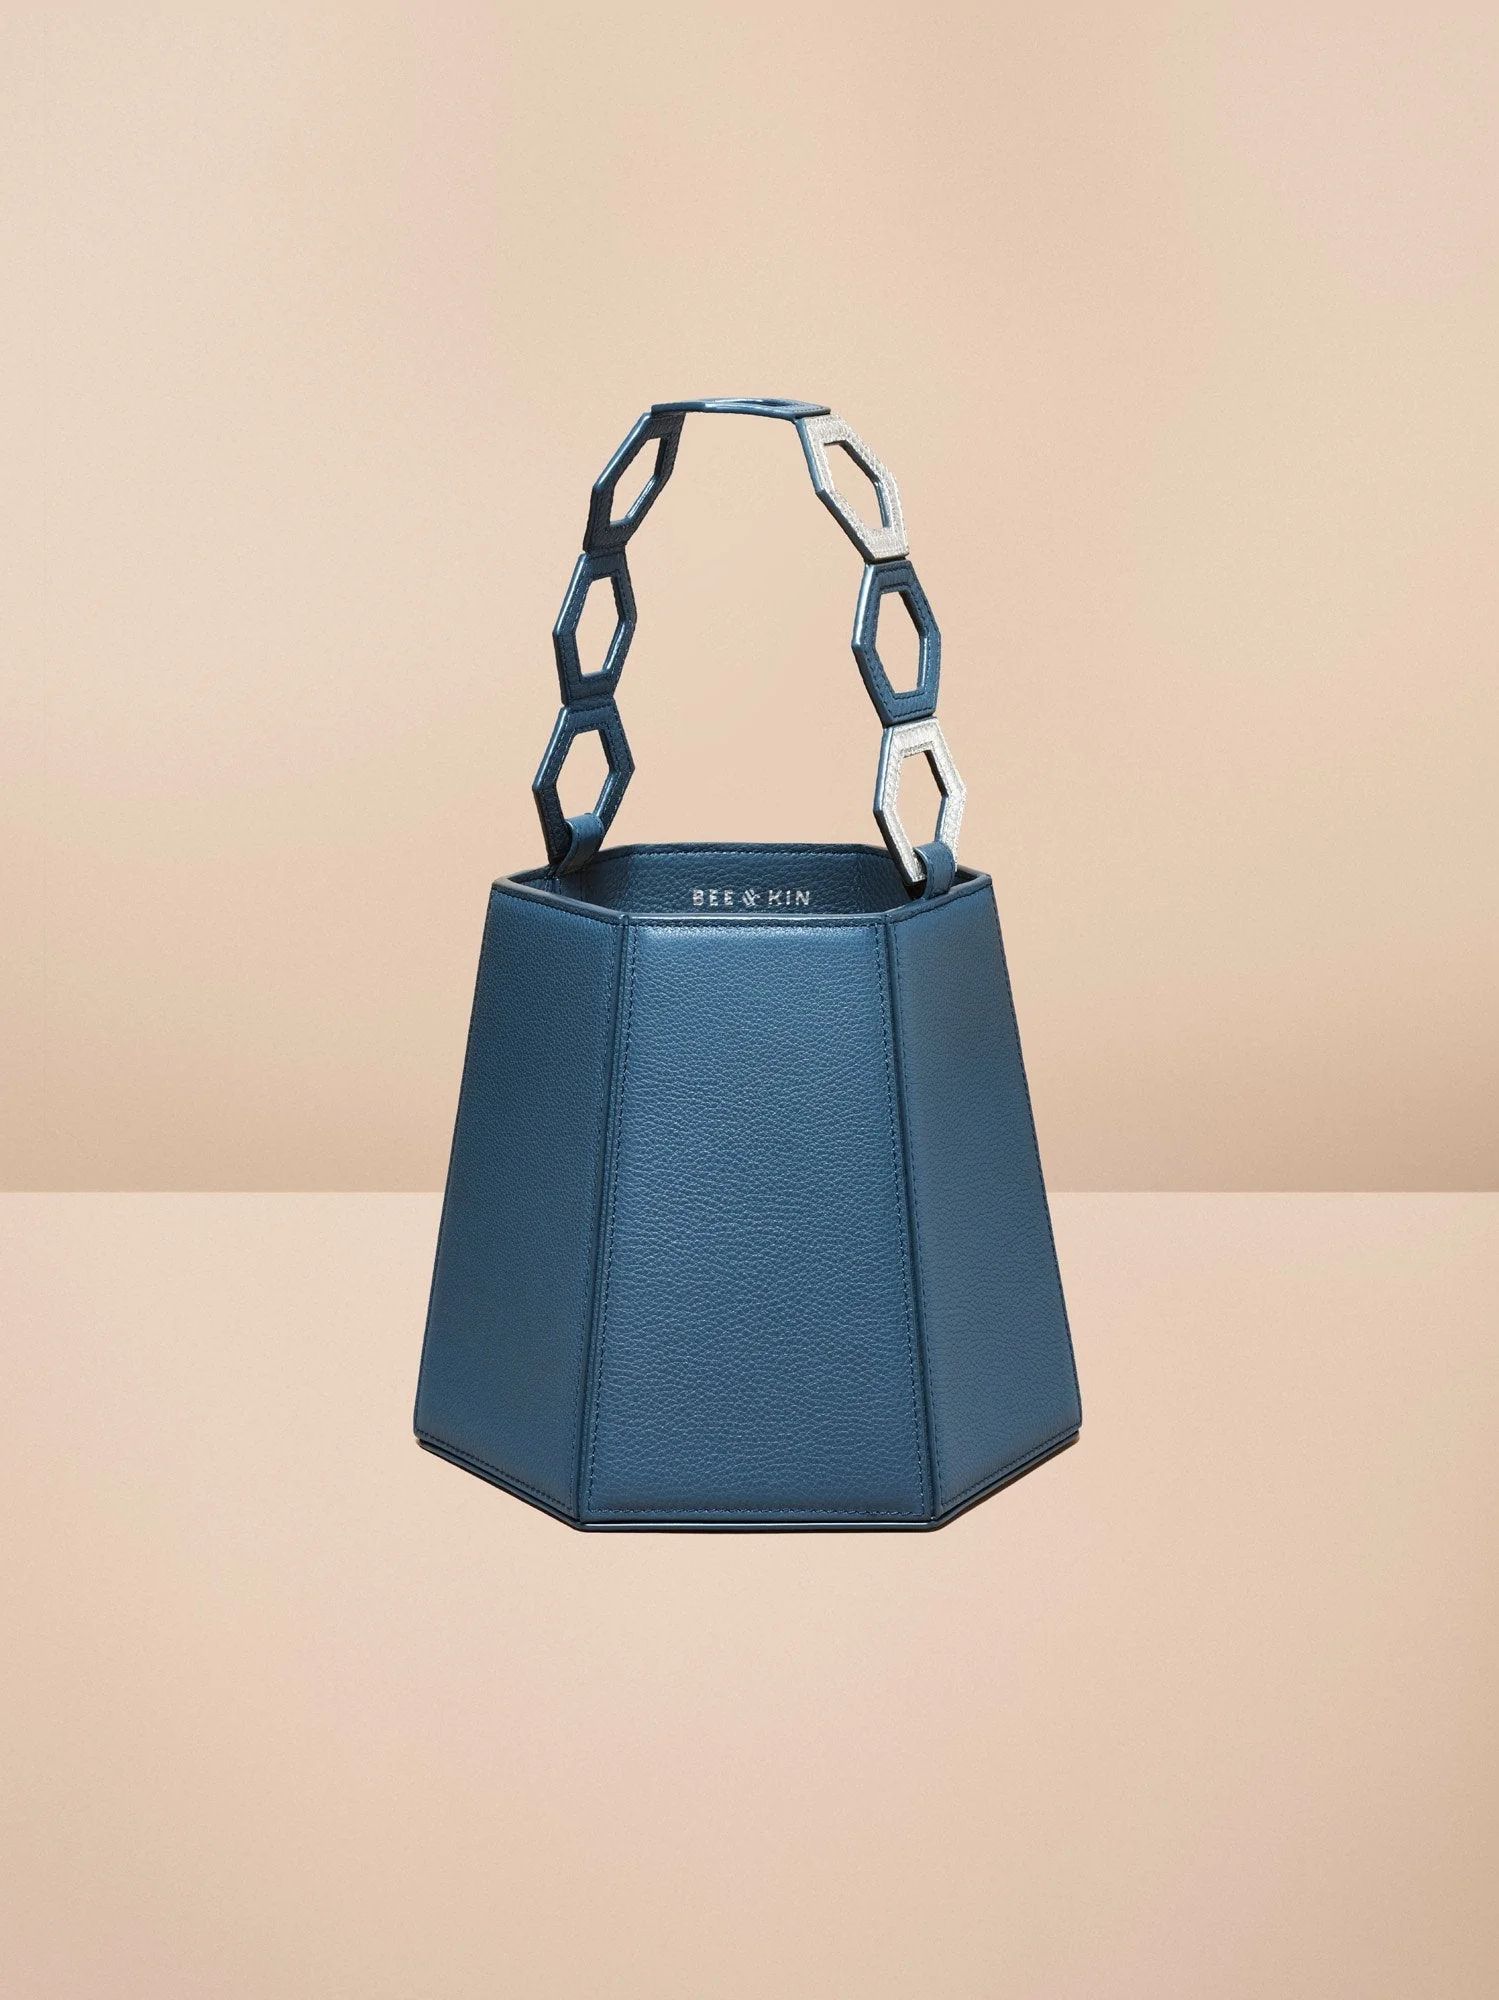 BEE & KIN The Rebel Leather Bucket Bag in Black with Interior LED Light | Bee & Kin